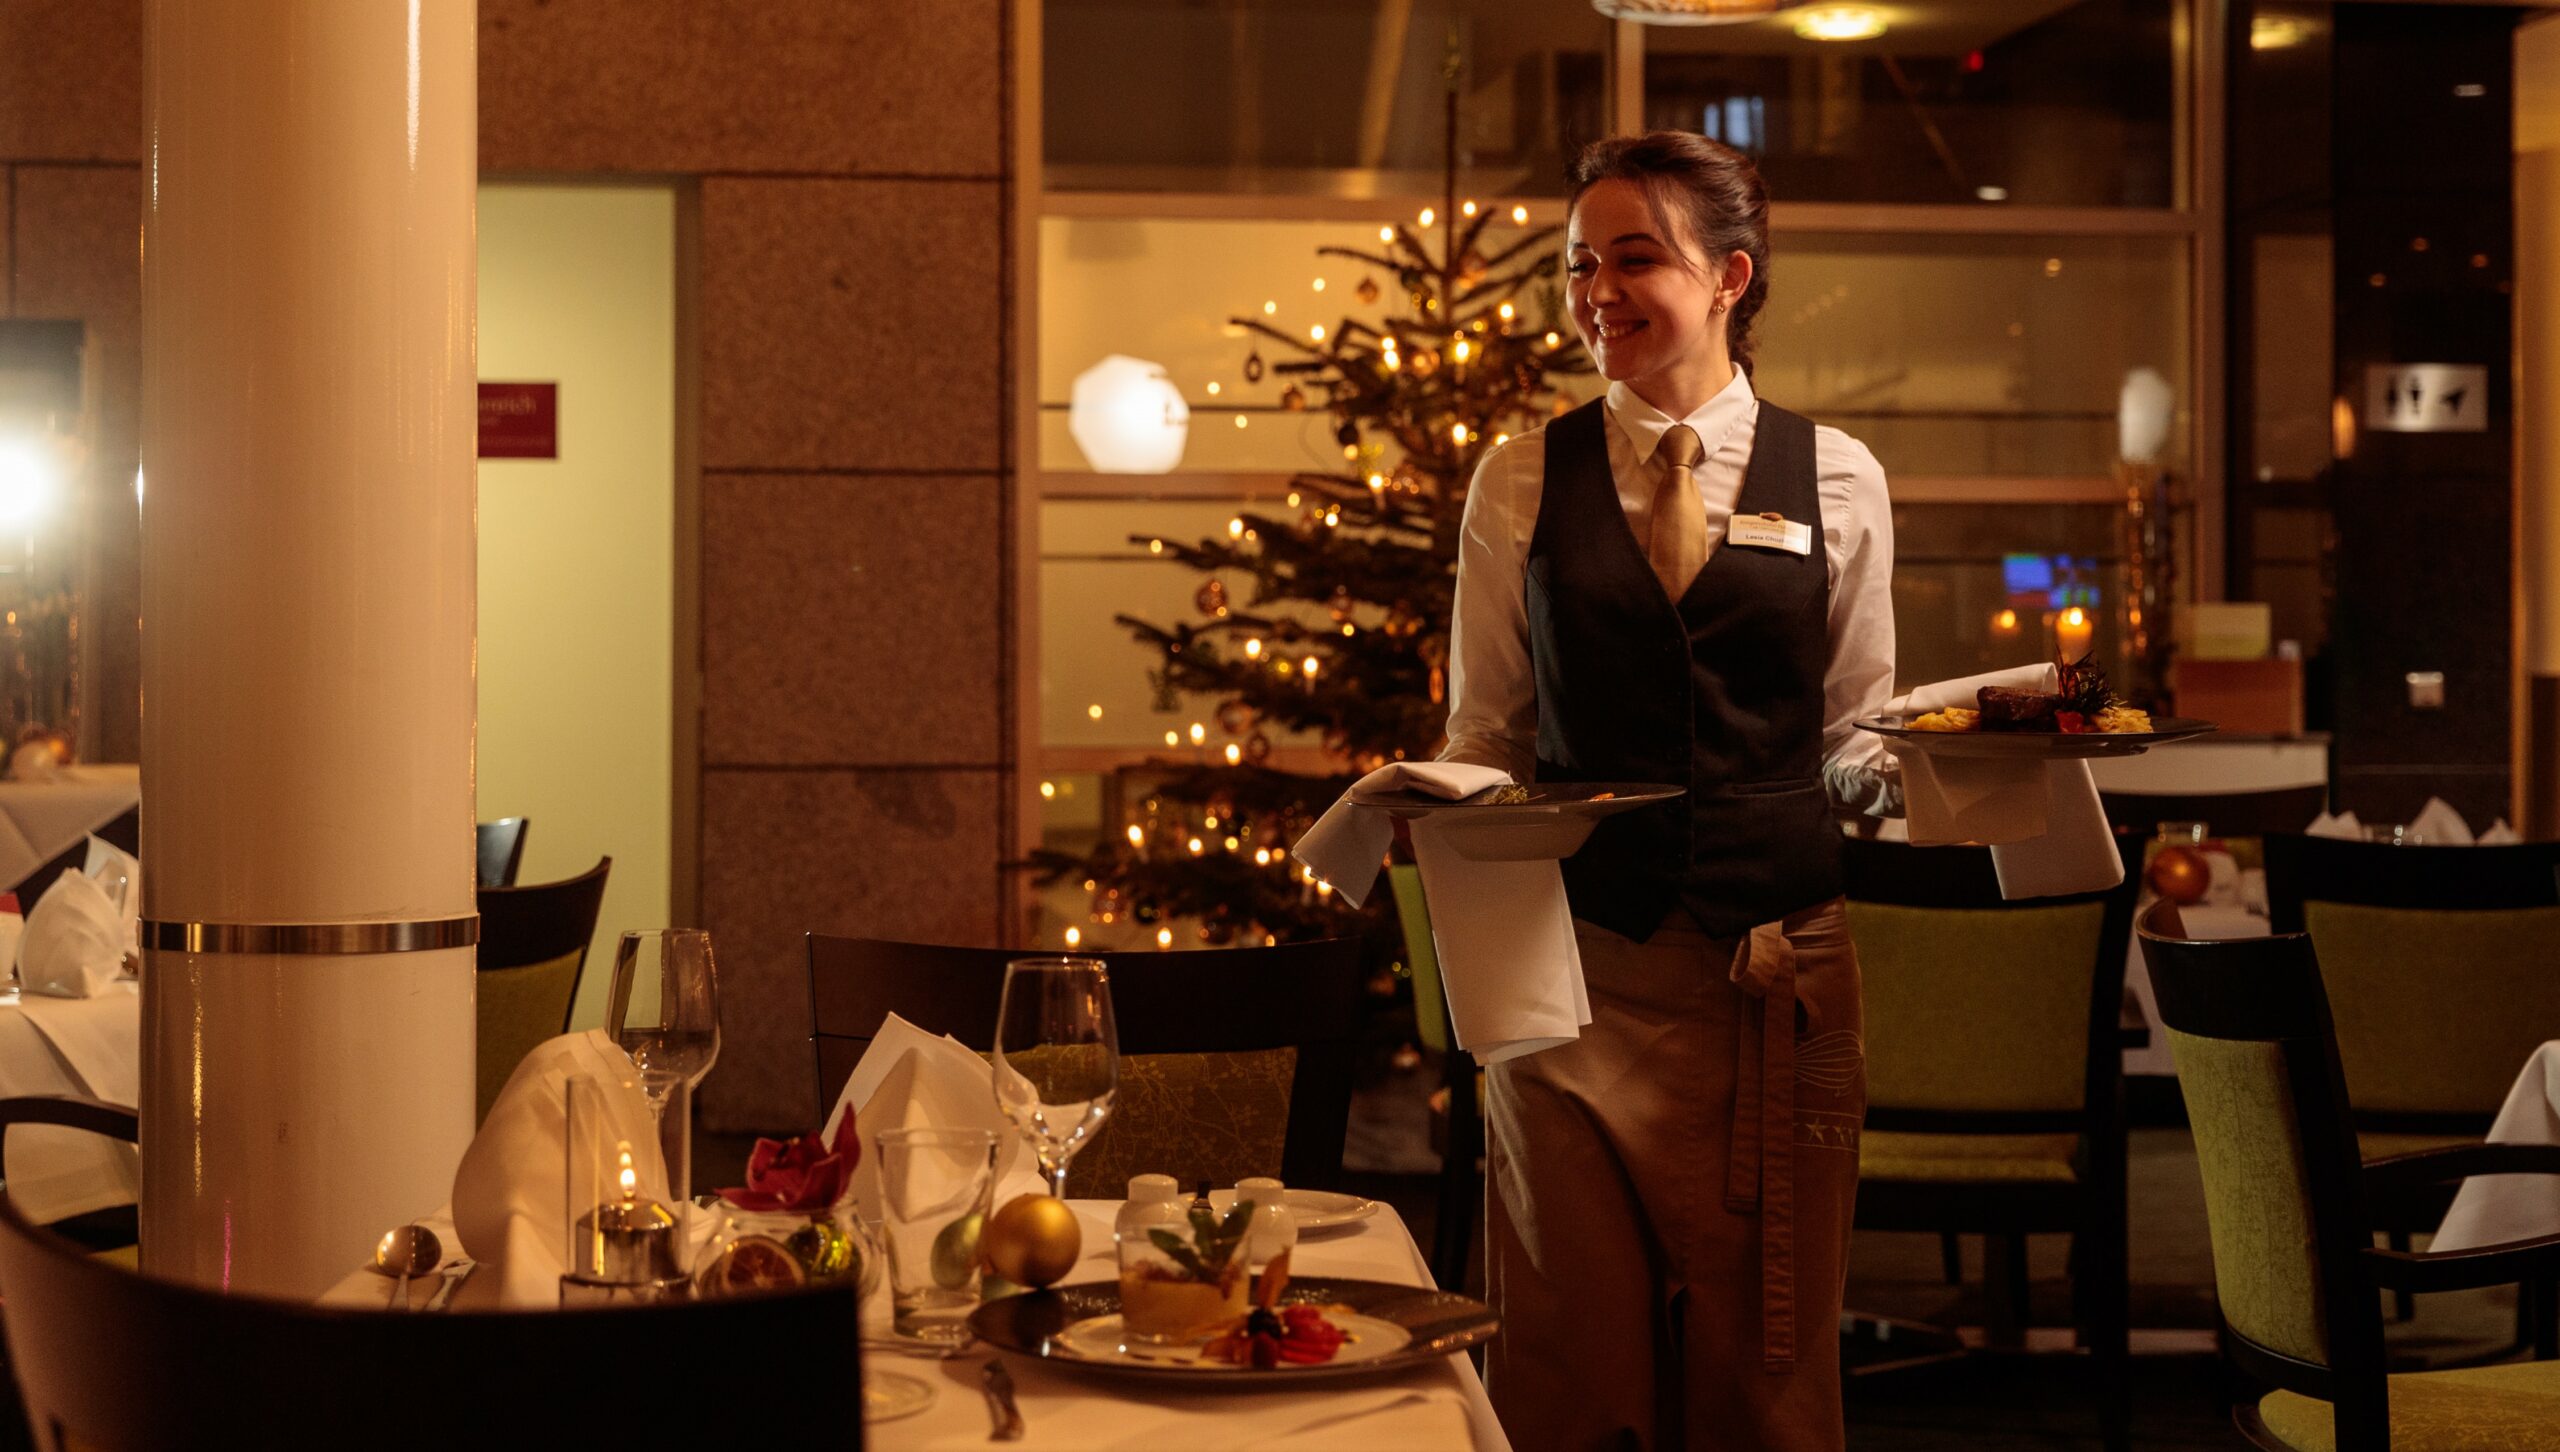 Christmas-service-restaurant-service-scaled